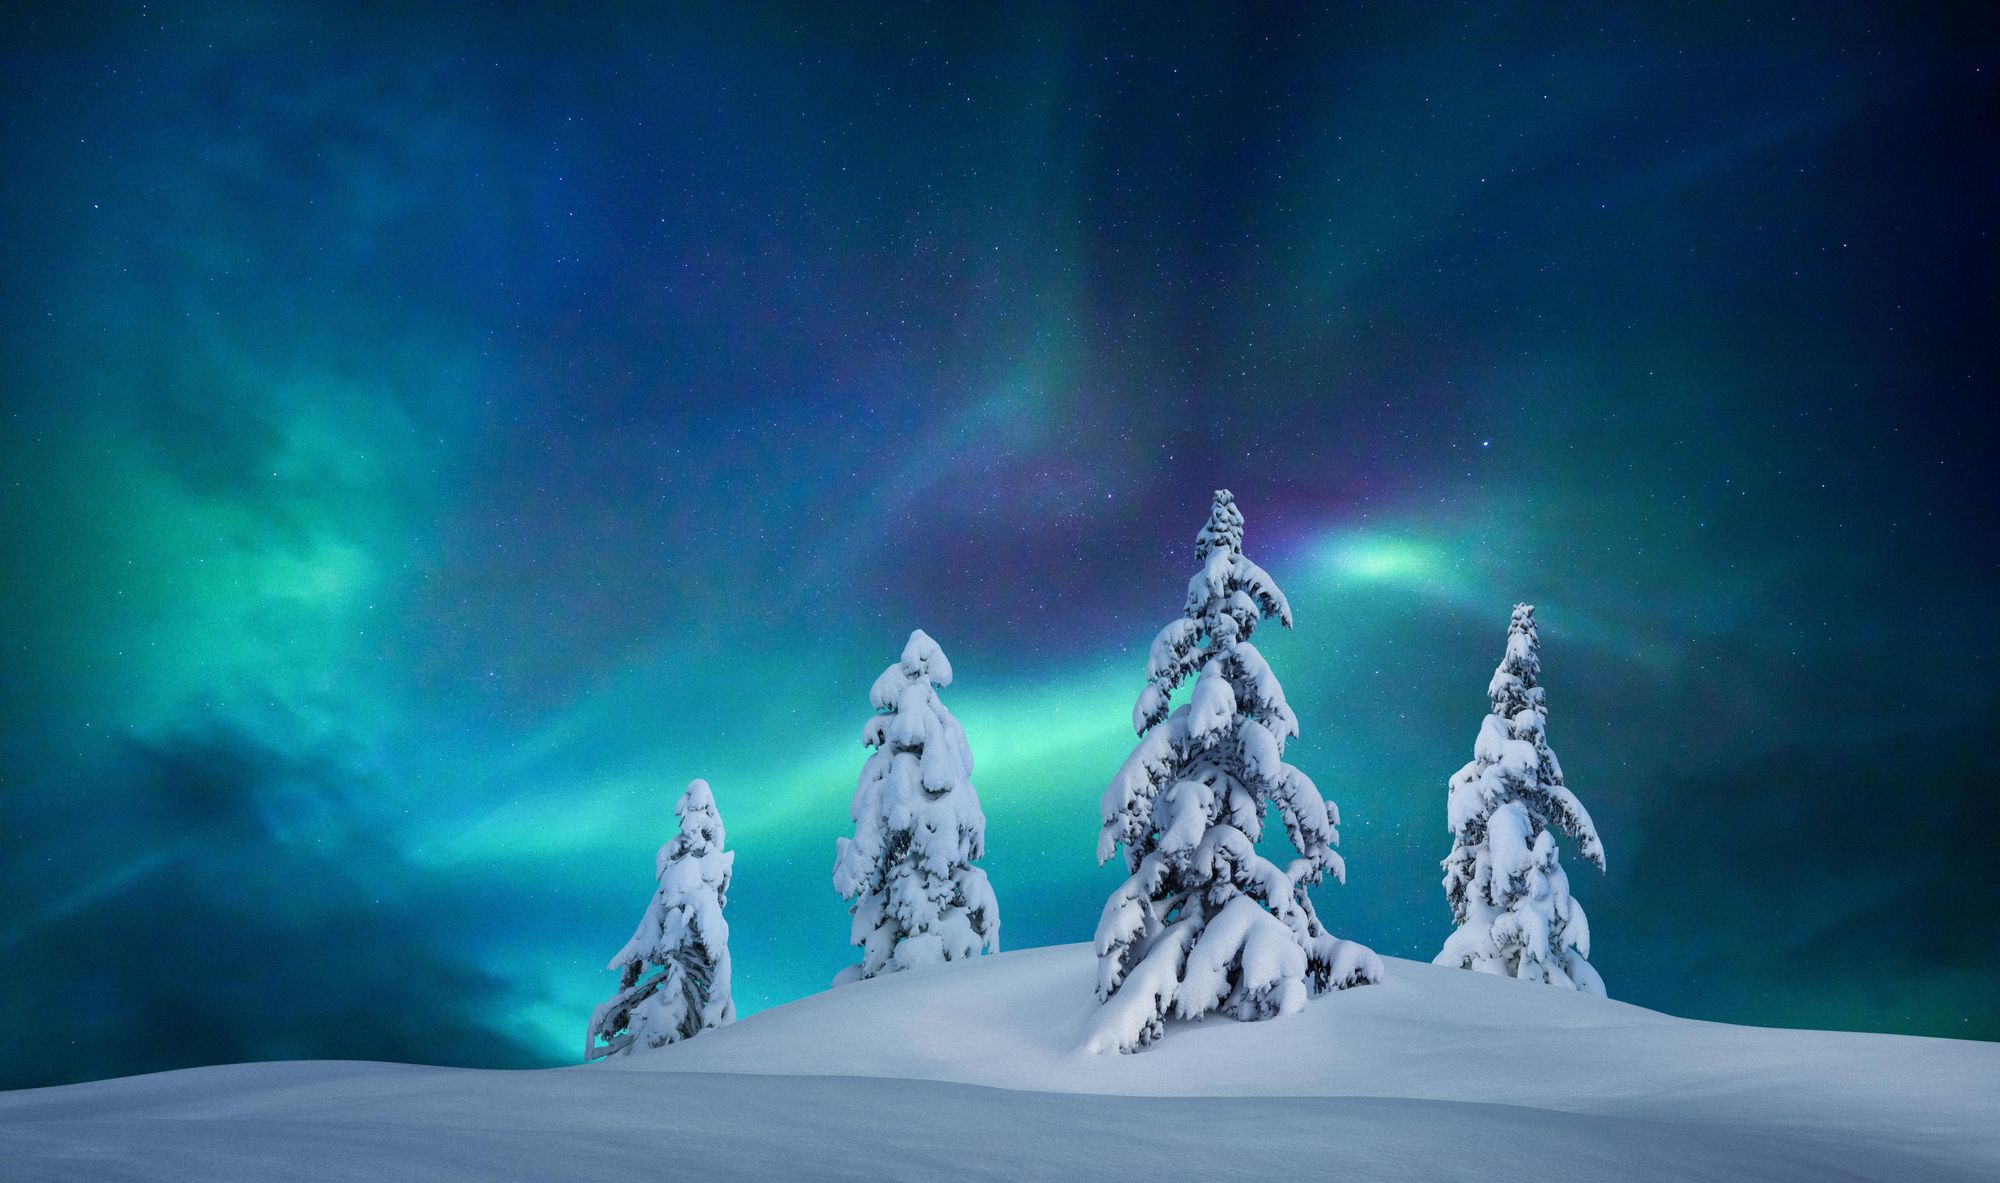 Snow covered trees under the northern lights in Finnish Lapland. Photo: Getty.